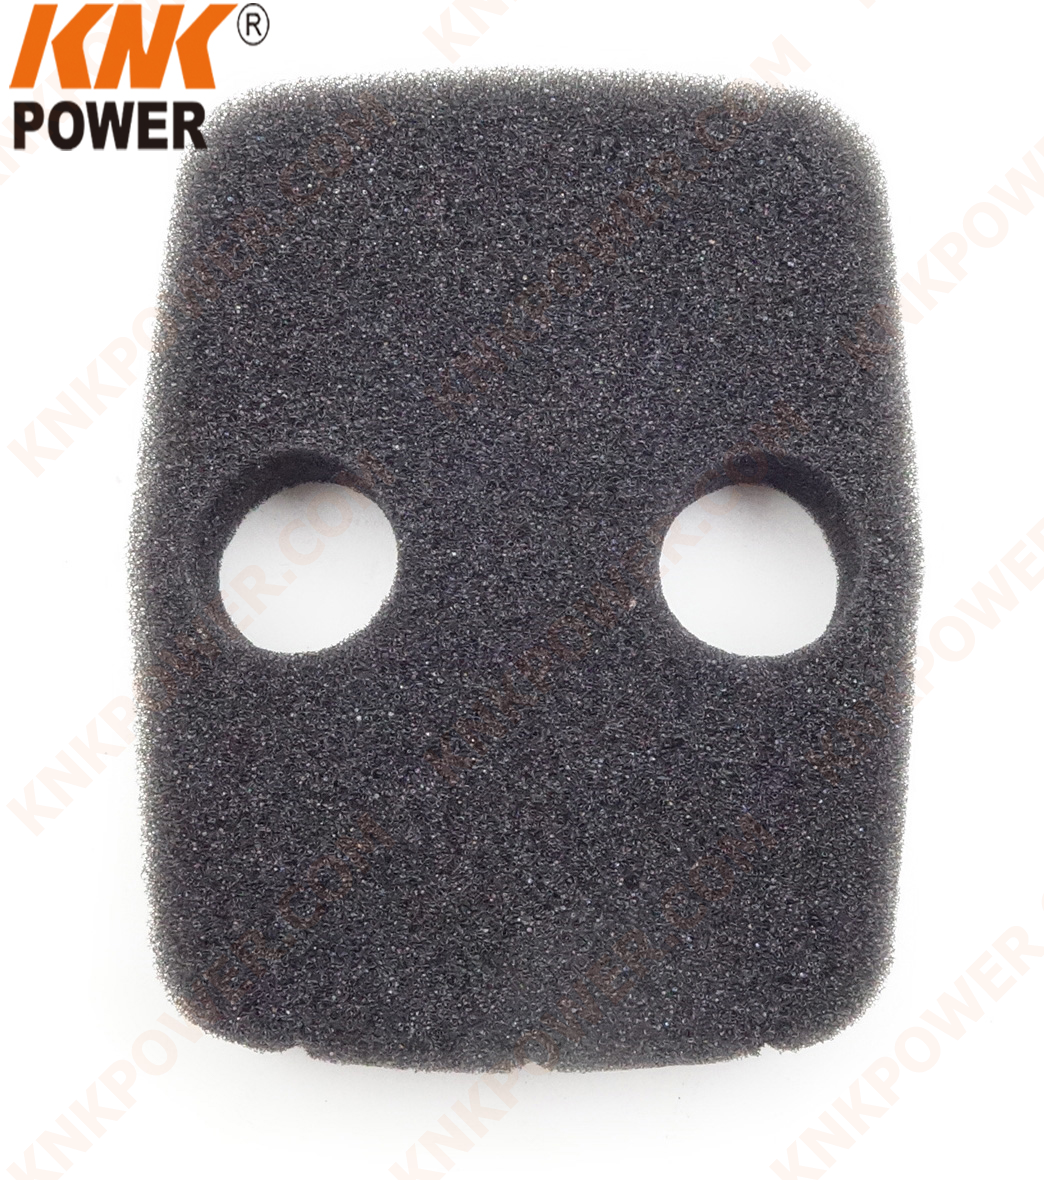 knkpower product image 19061 